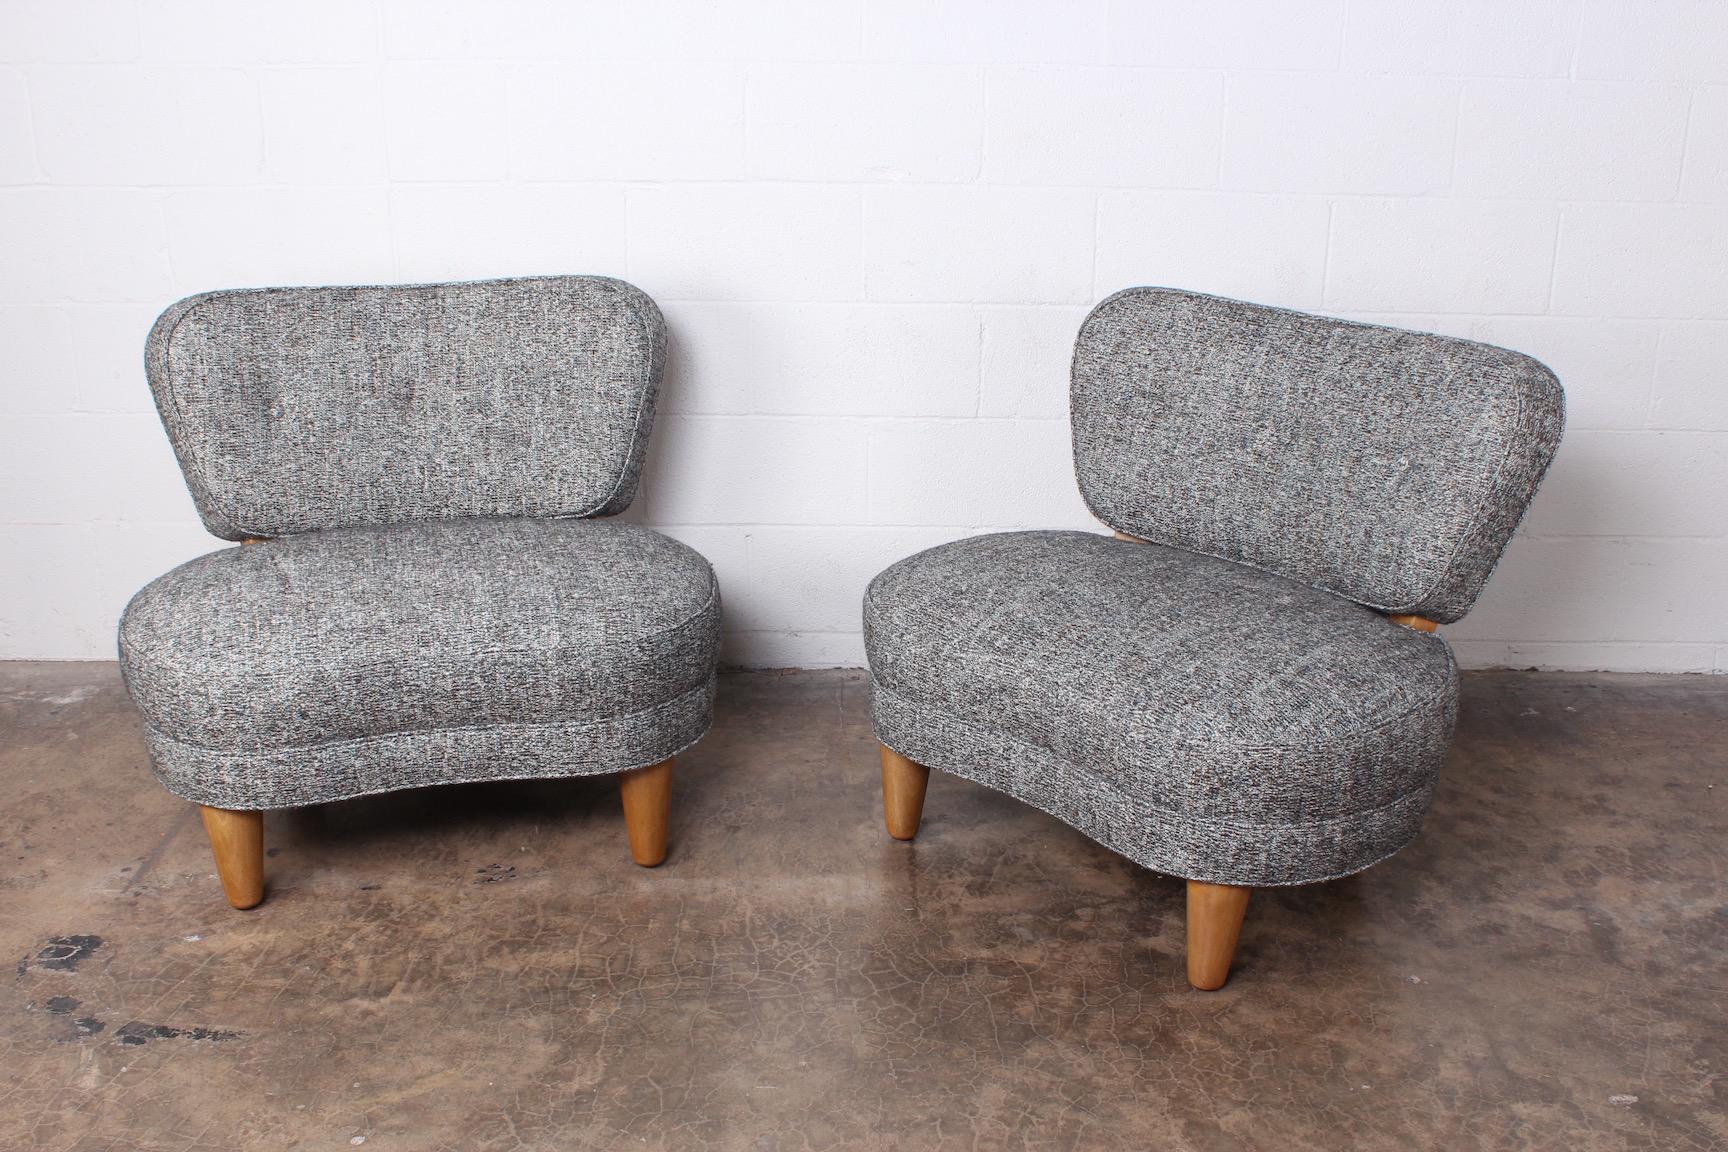 A rare pair of slipper chairs with bleached mahogany frames. Designed by Edward Wormley for Dunbar.